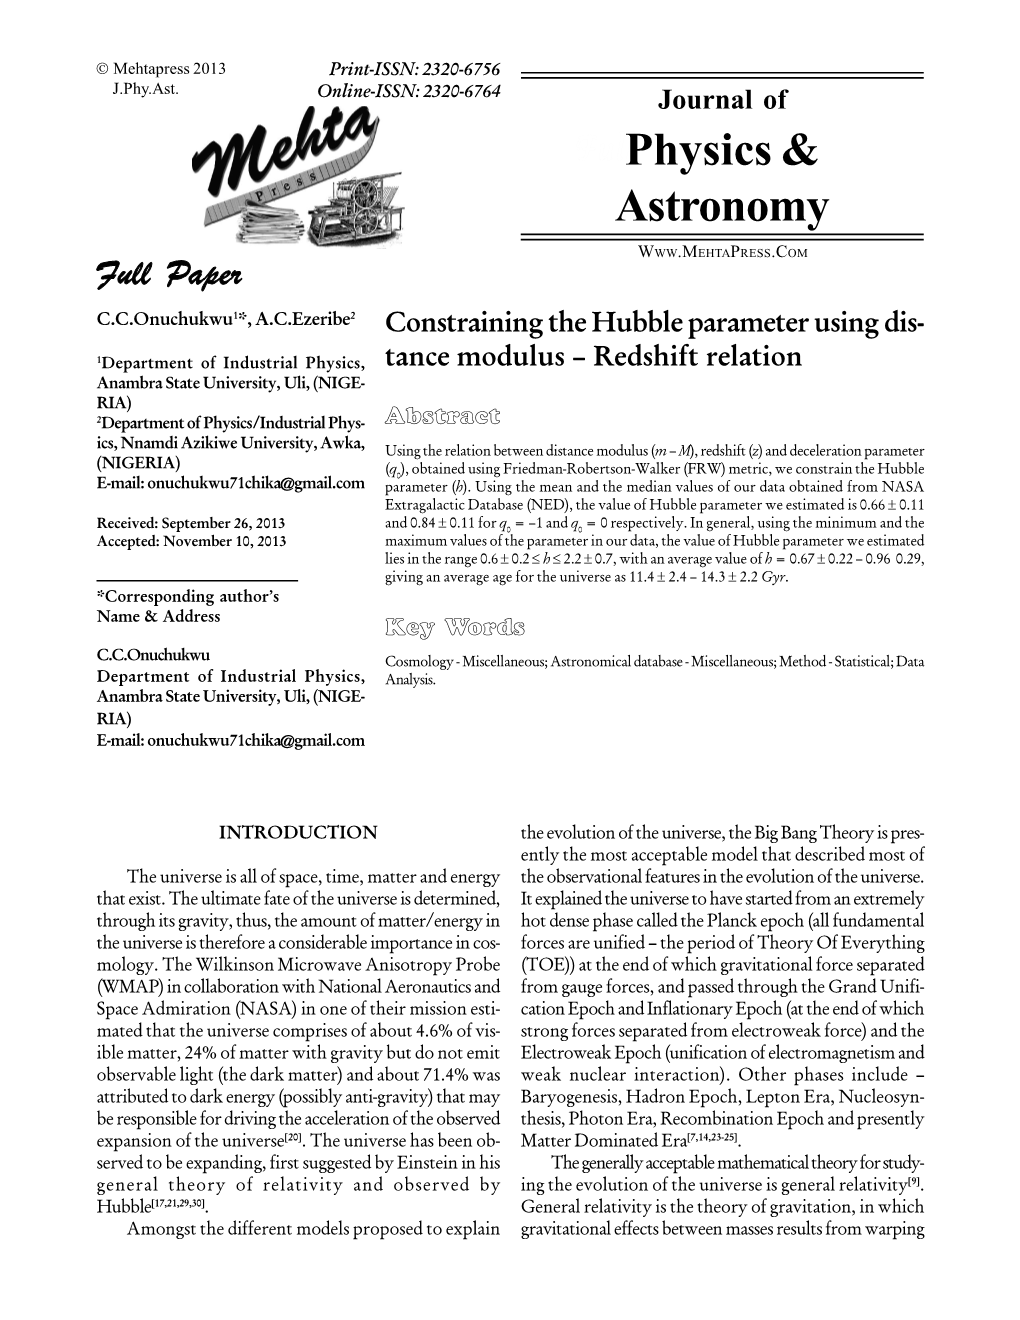 Constraining the Hubble Parameter Using Distance Modulus-Redshift